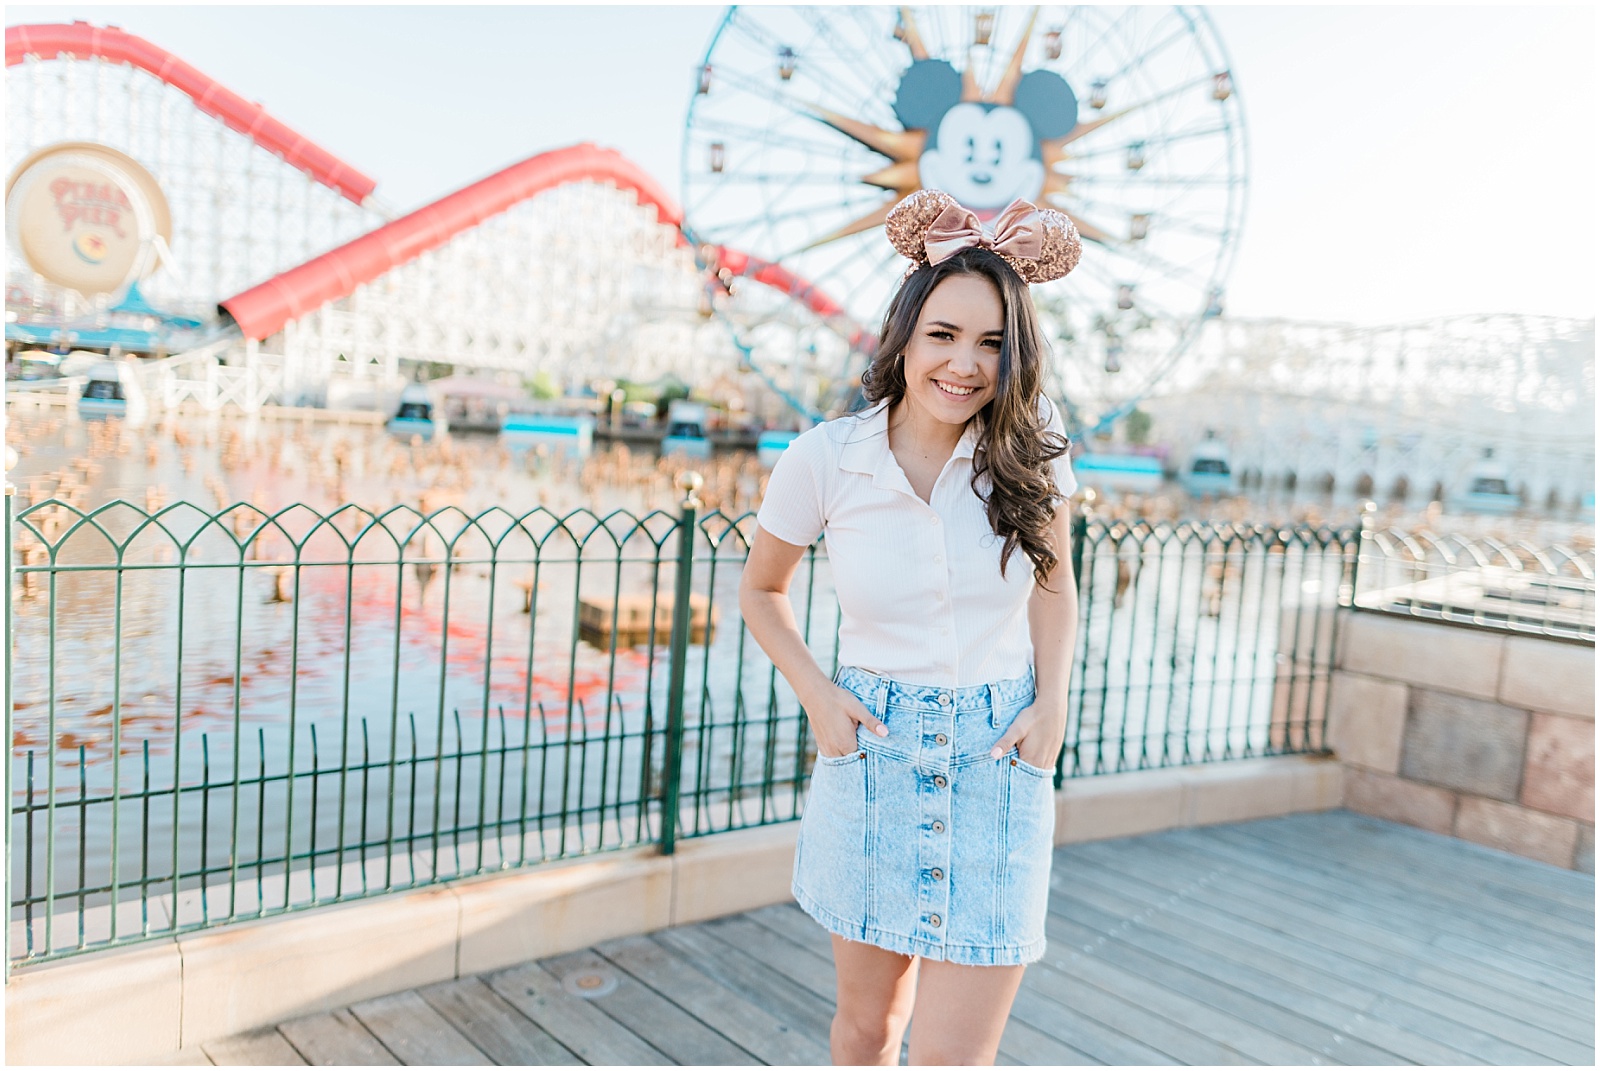 Disneyland Pixar Pier Senior Session. Images by Mollie Jane Photography. To see more go to www.molliejanephotography.com.